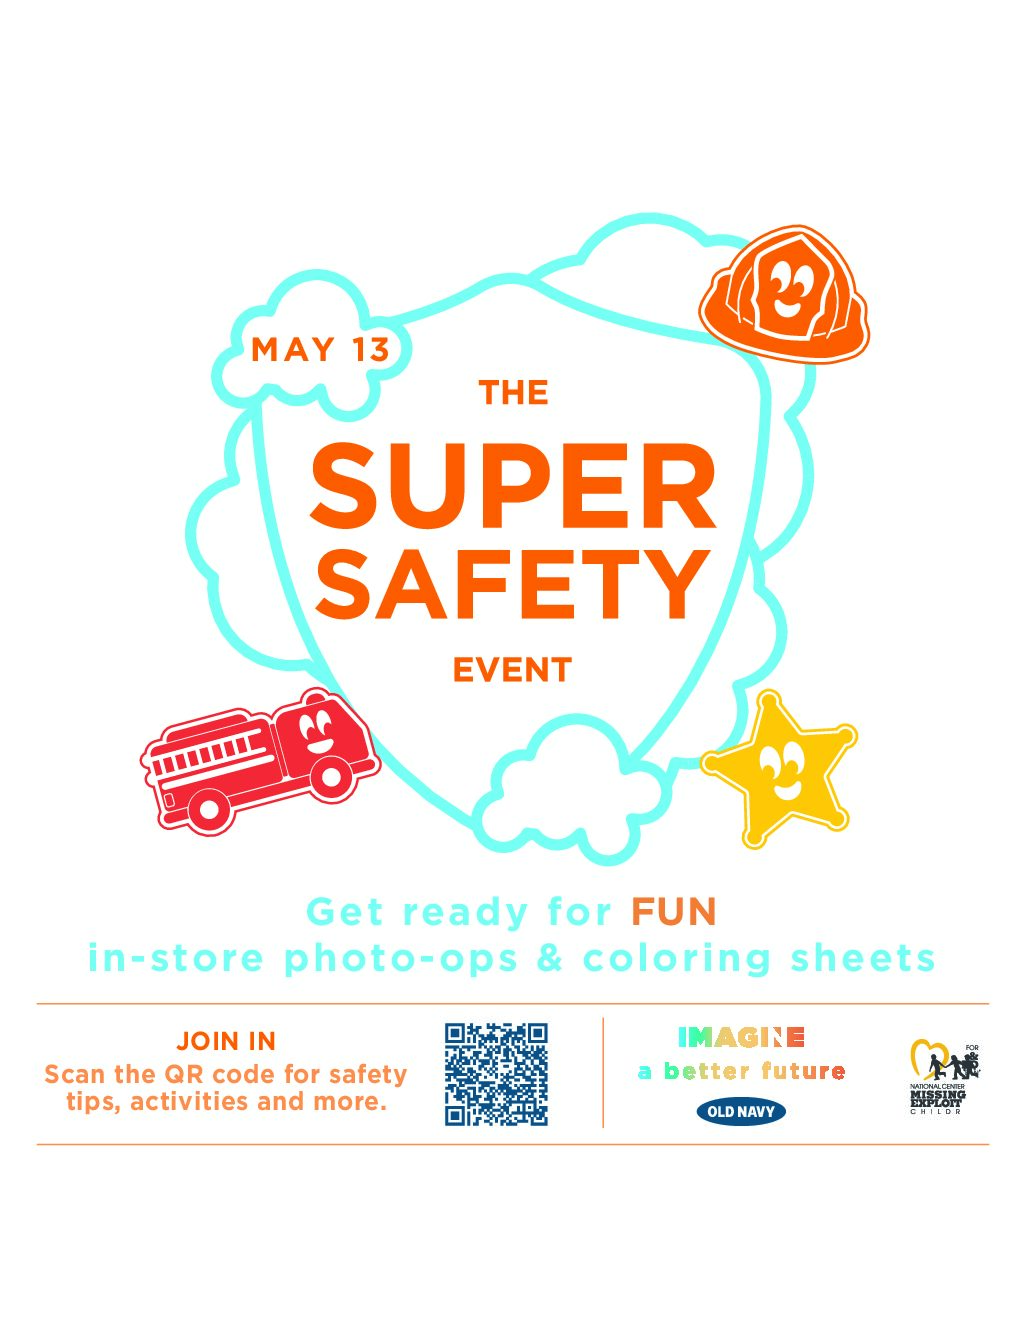 The Super Safety Event at Old Navy Presented by the NCMEC